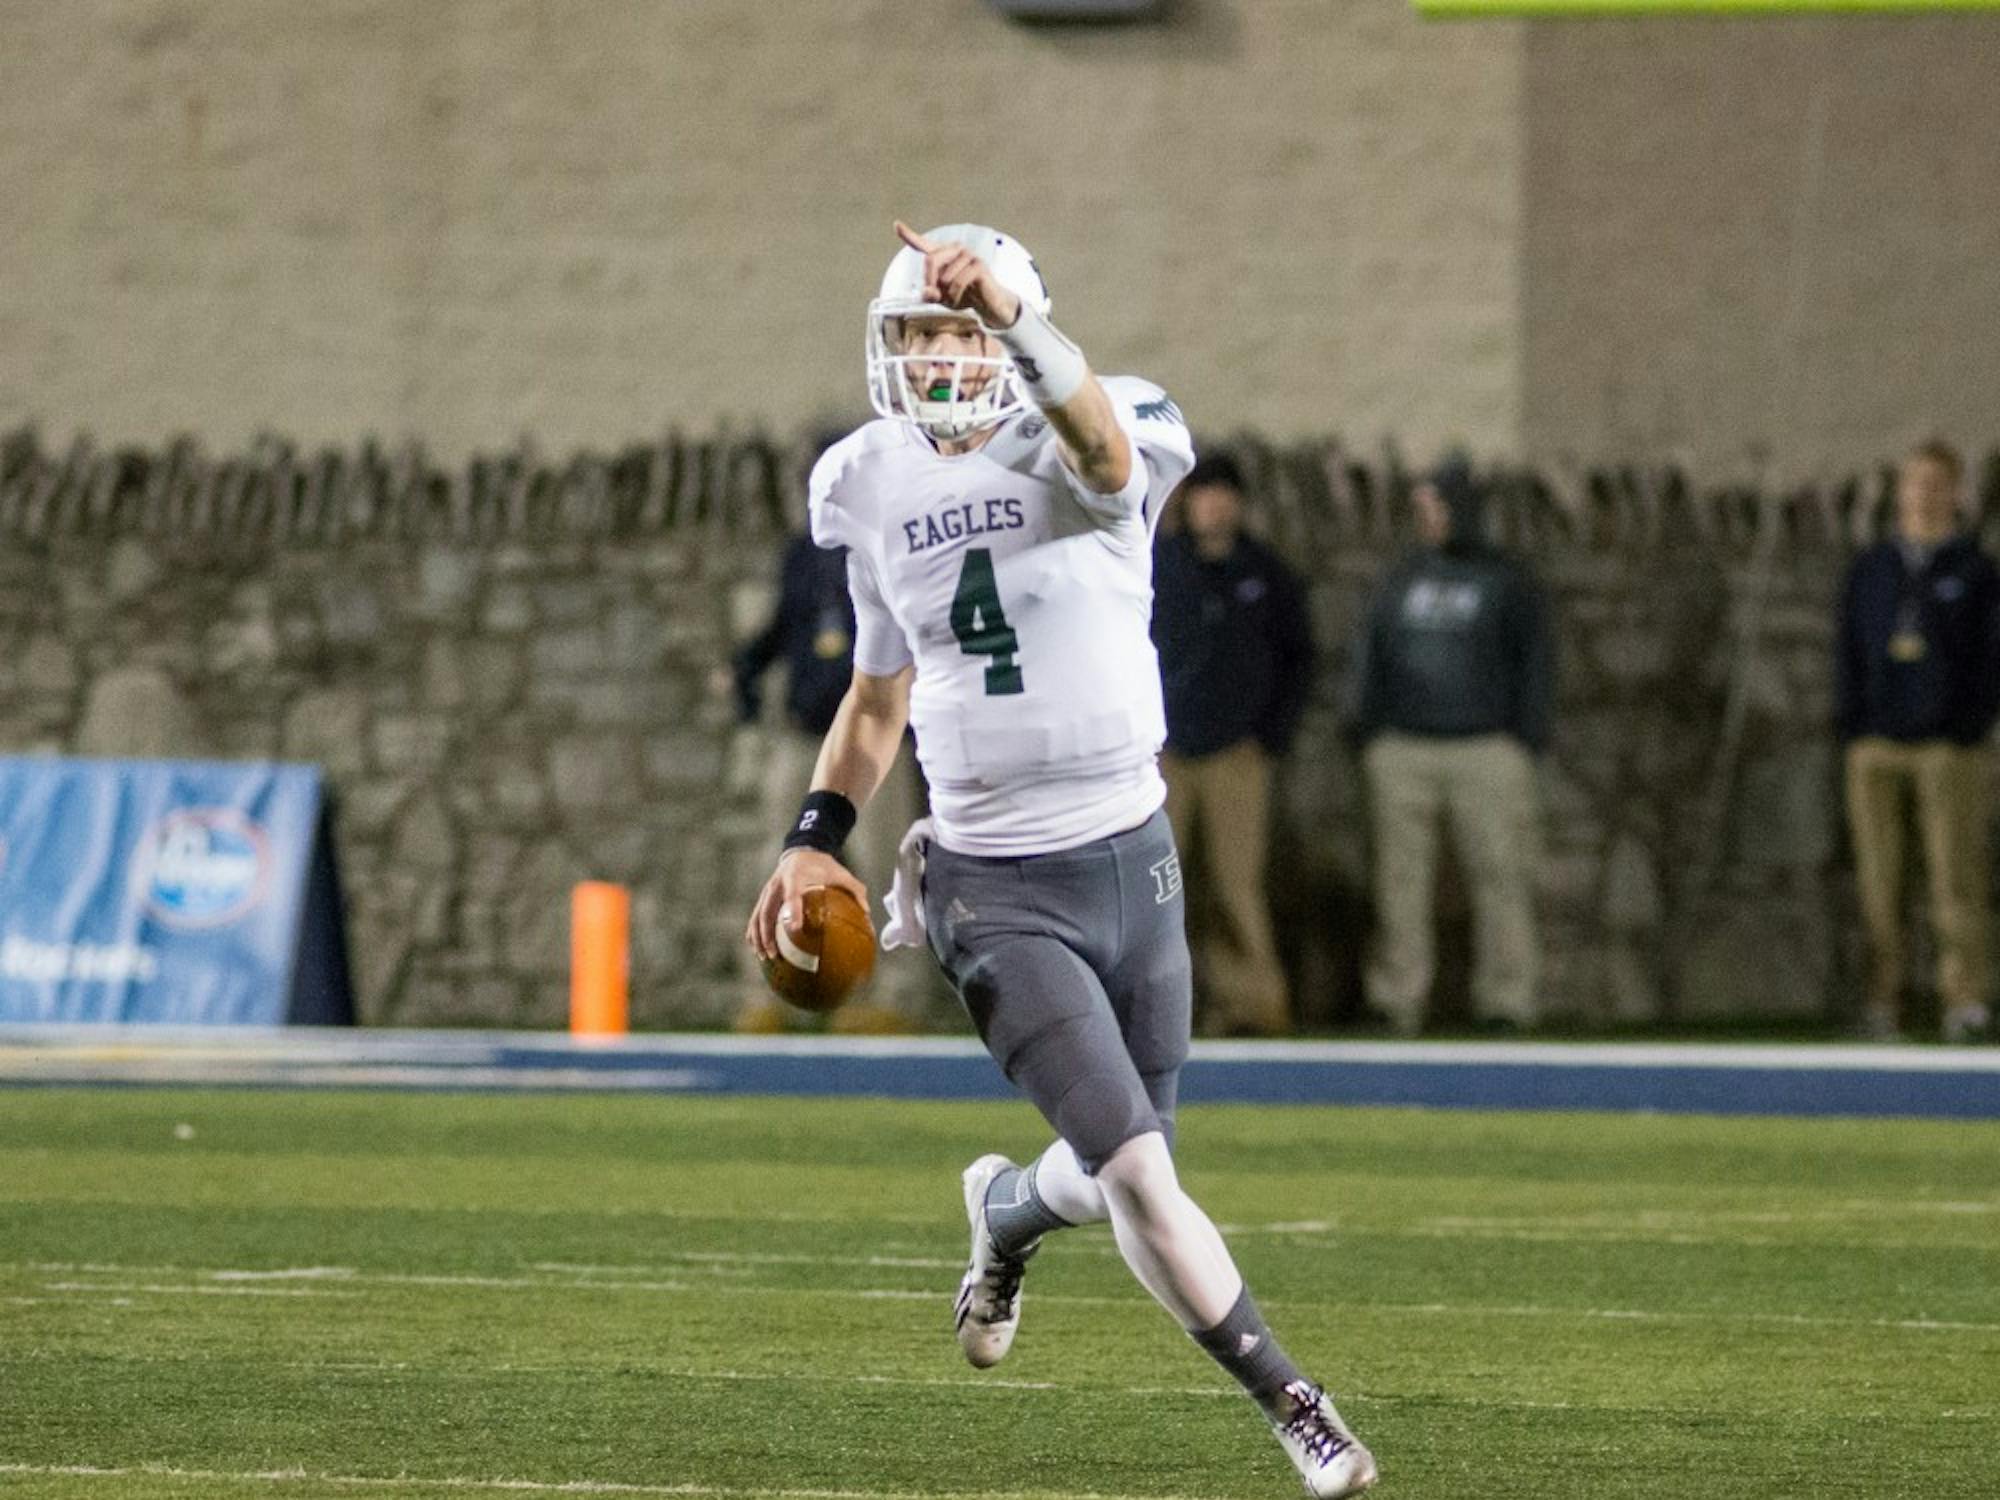 Eagles quarterback Brogan Roback threw for two touchdowns and had a career long 45 yard pass in Eastern Michigan's 55-16 loss to Toledo.